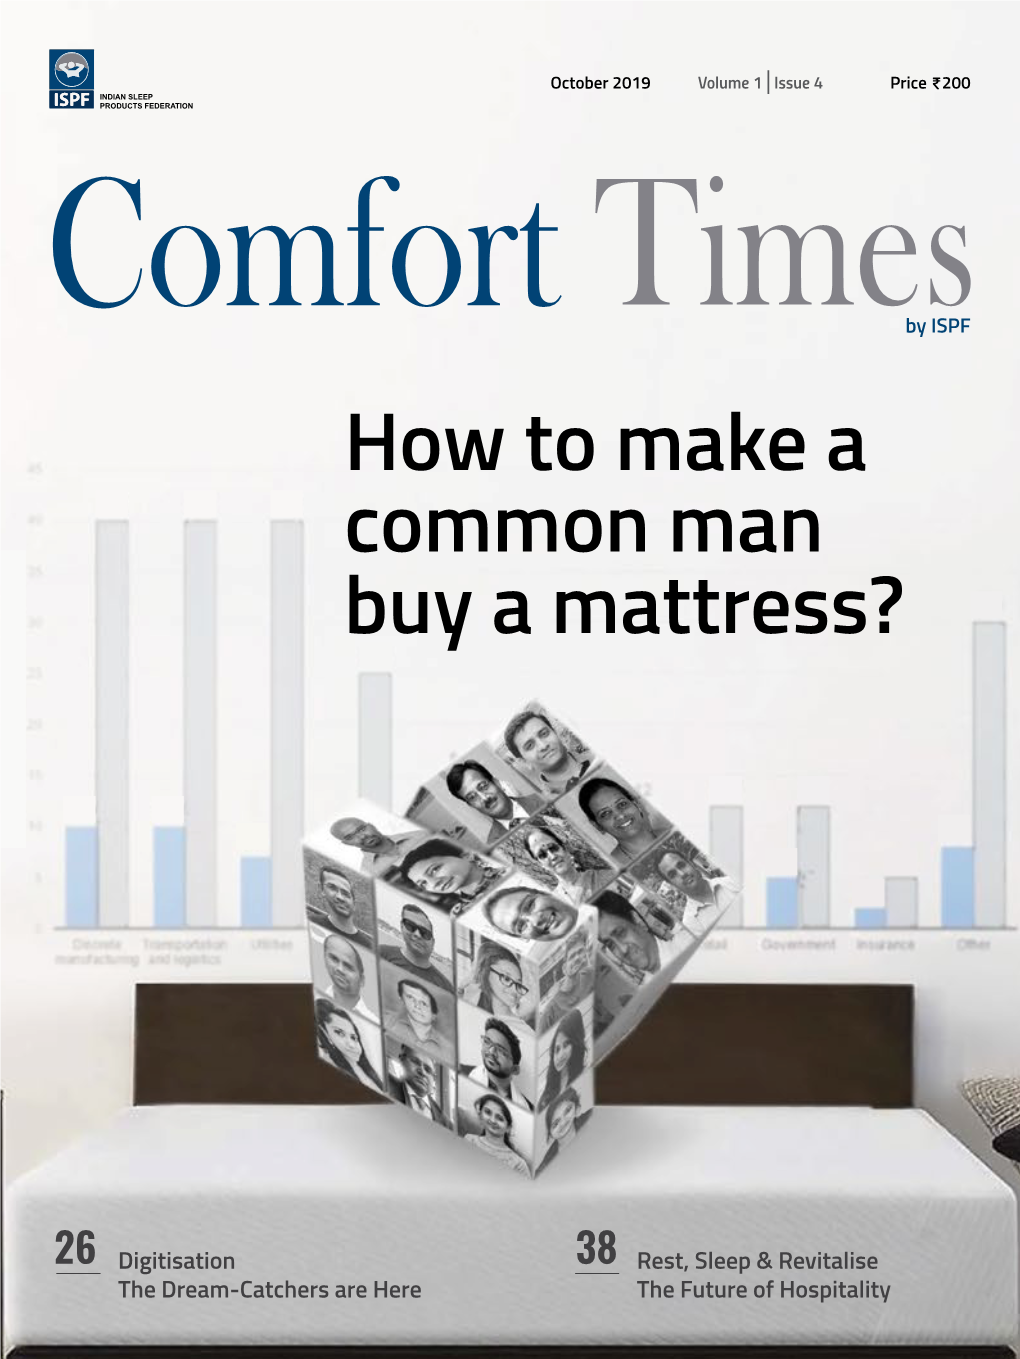 How to Make a Common Man Buy a Mattress?